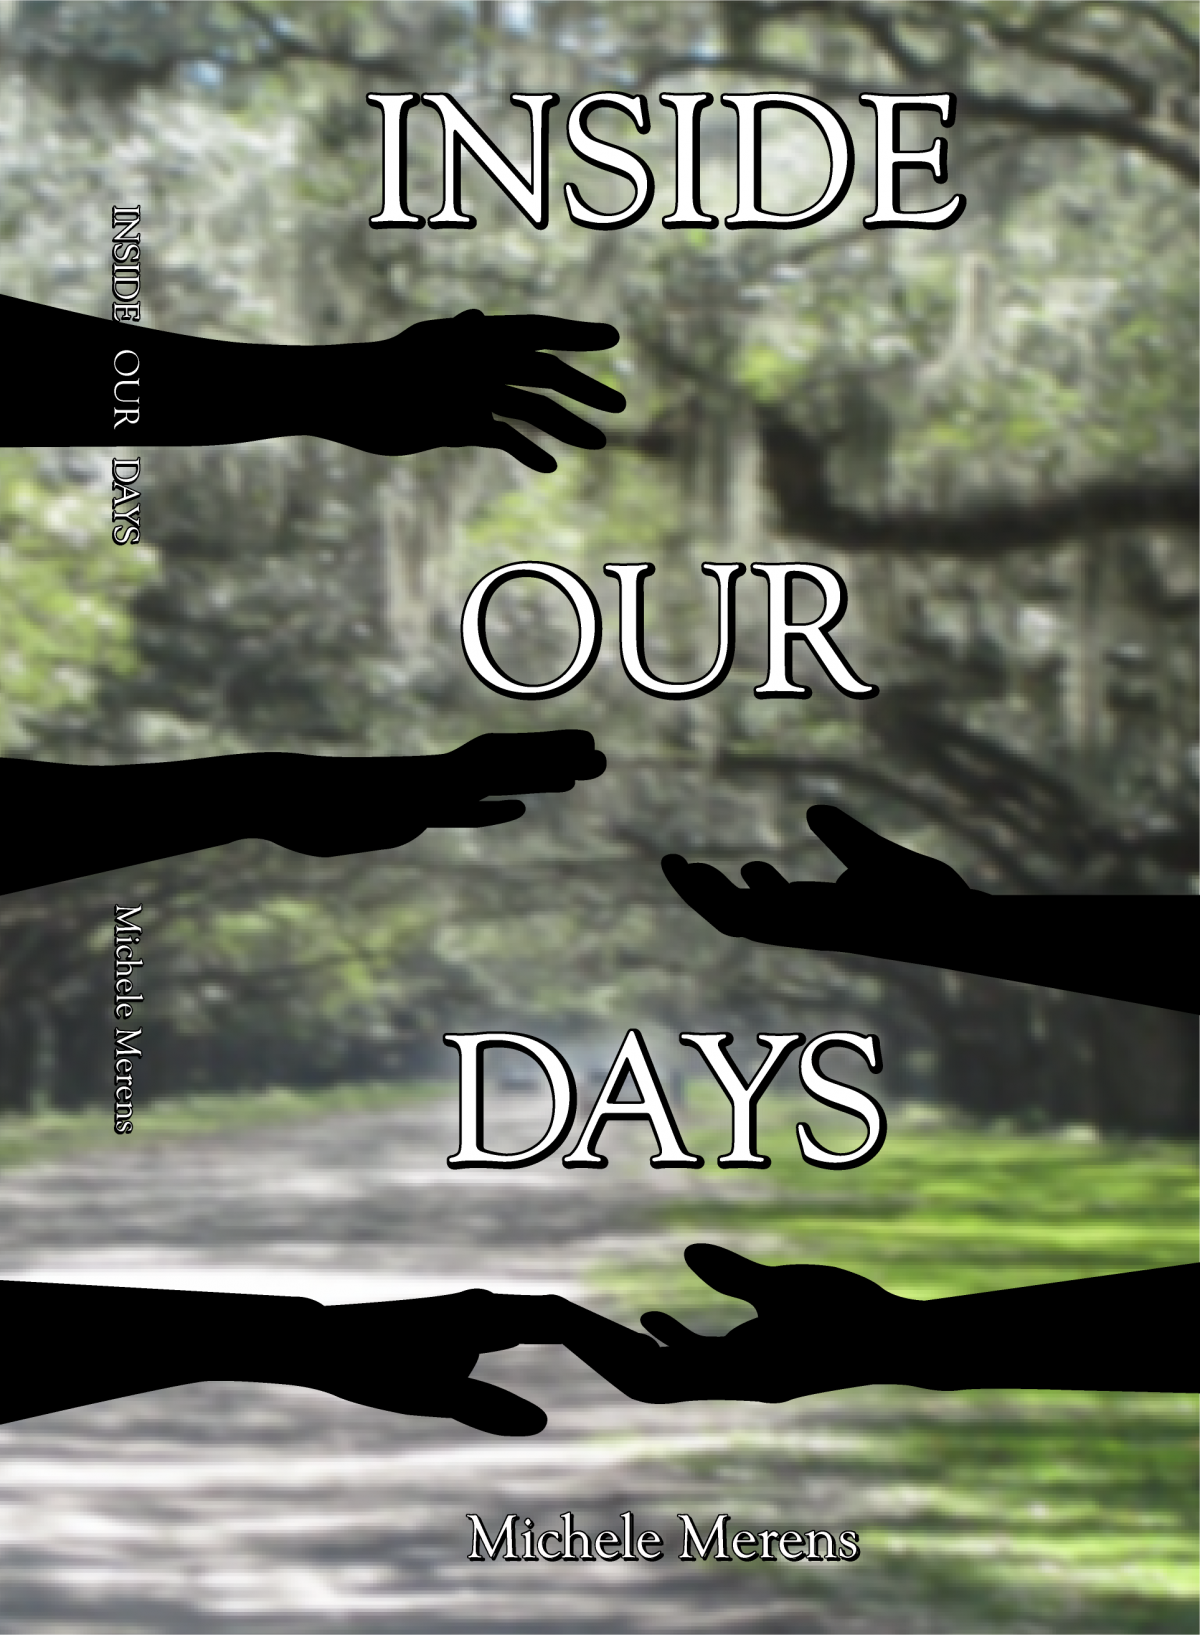 Cover of "Inside Our Days" by Michele Merens.